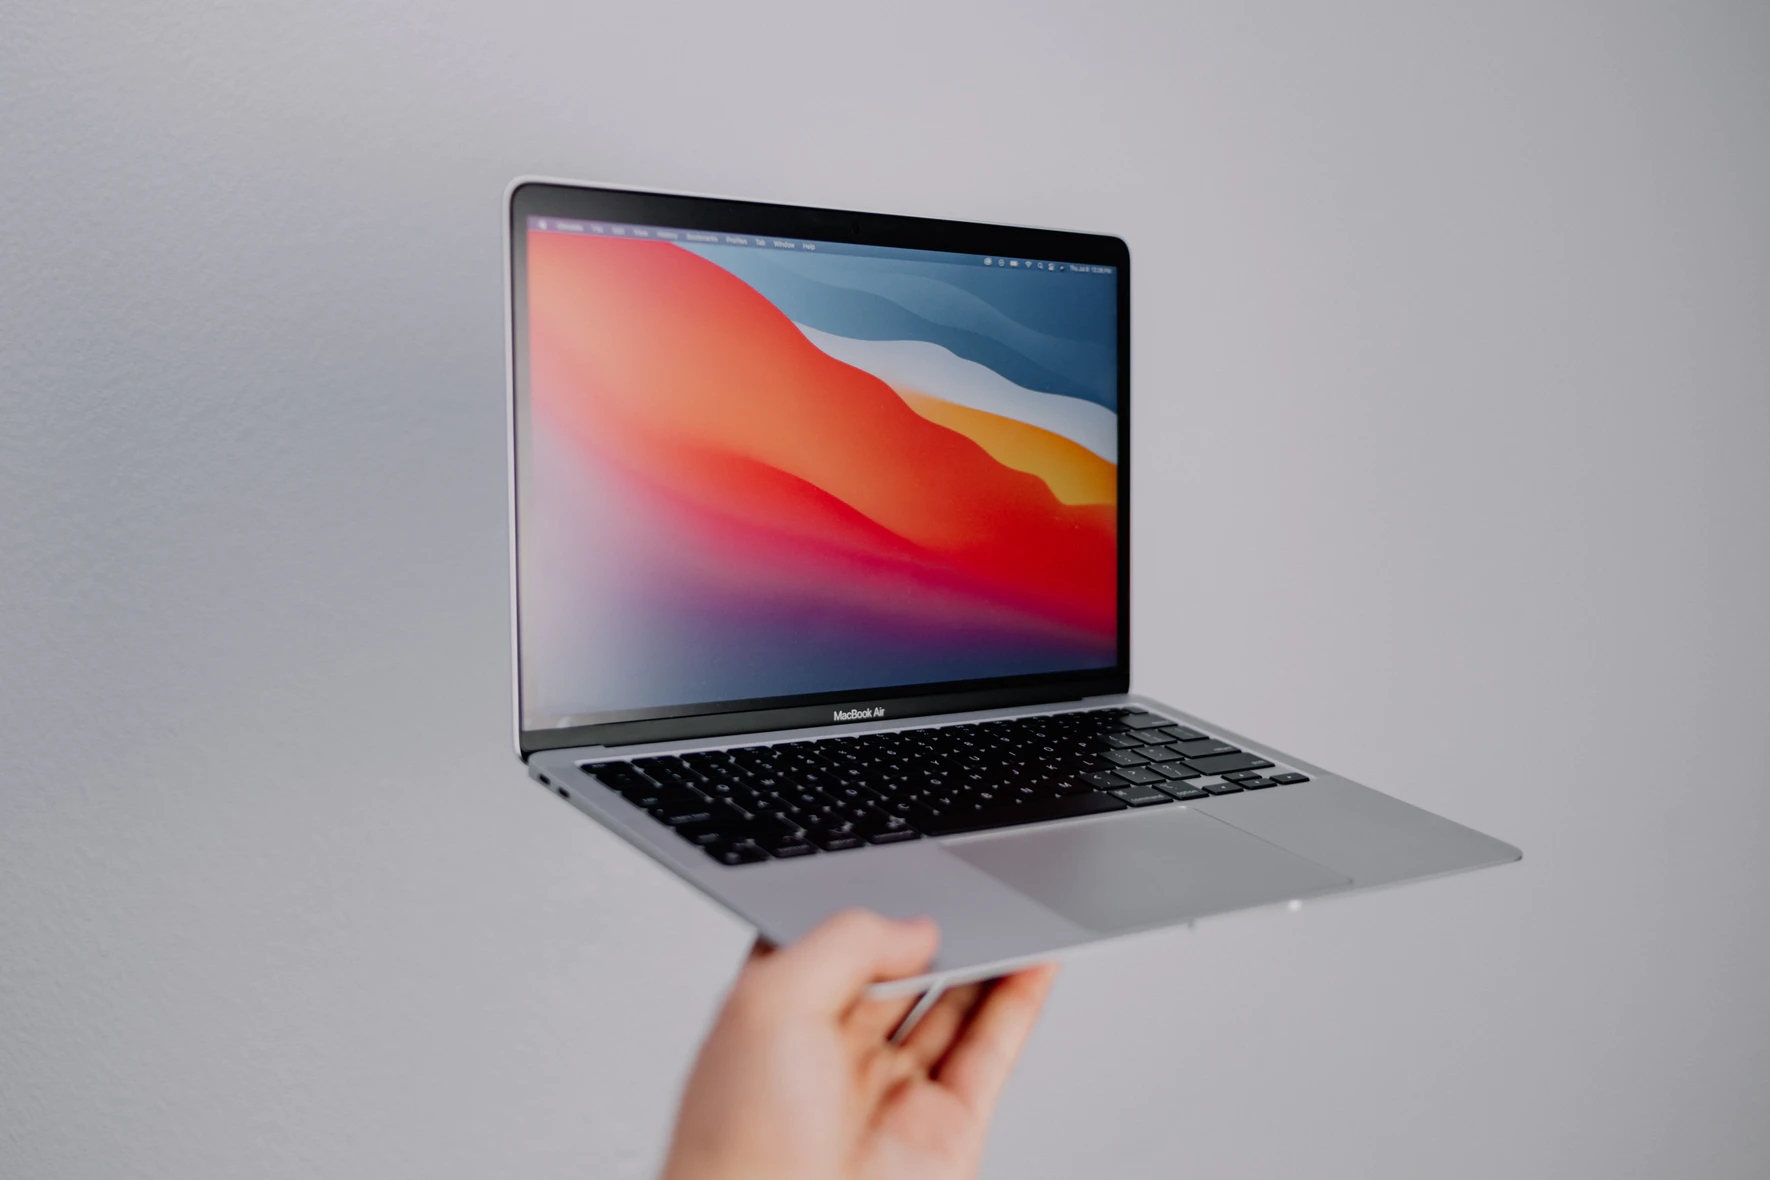 arrive banner the MacBook Rumoured may not NotebookCheck.net 15-inch MacBook Air News Apple under -